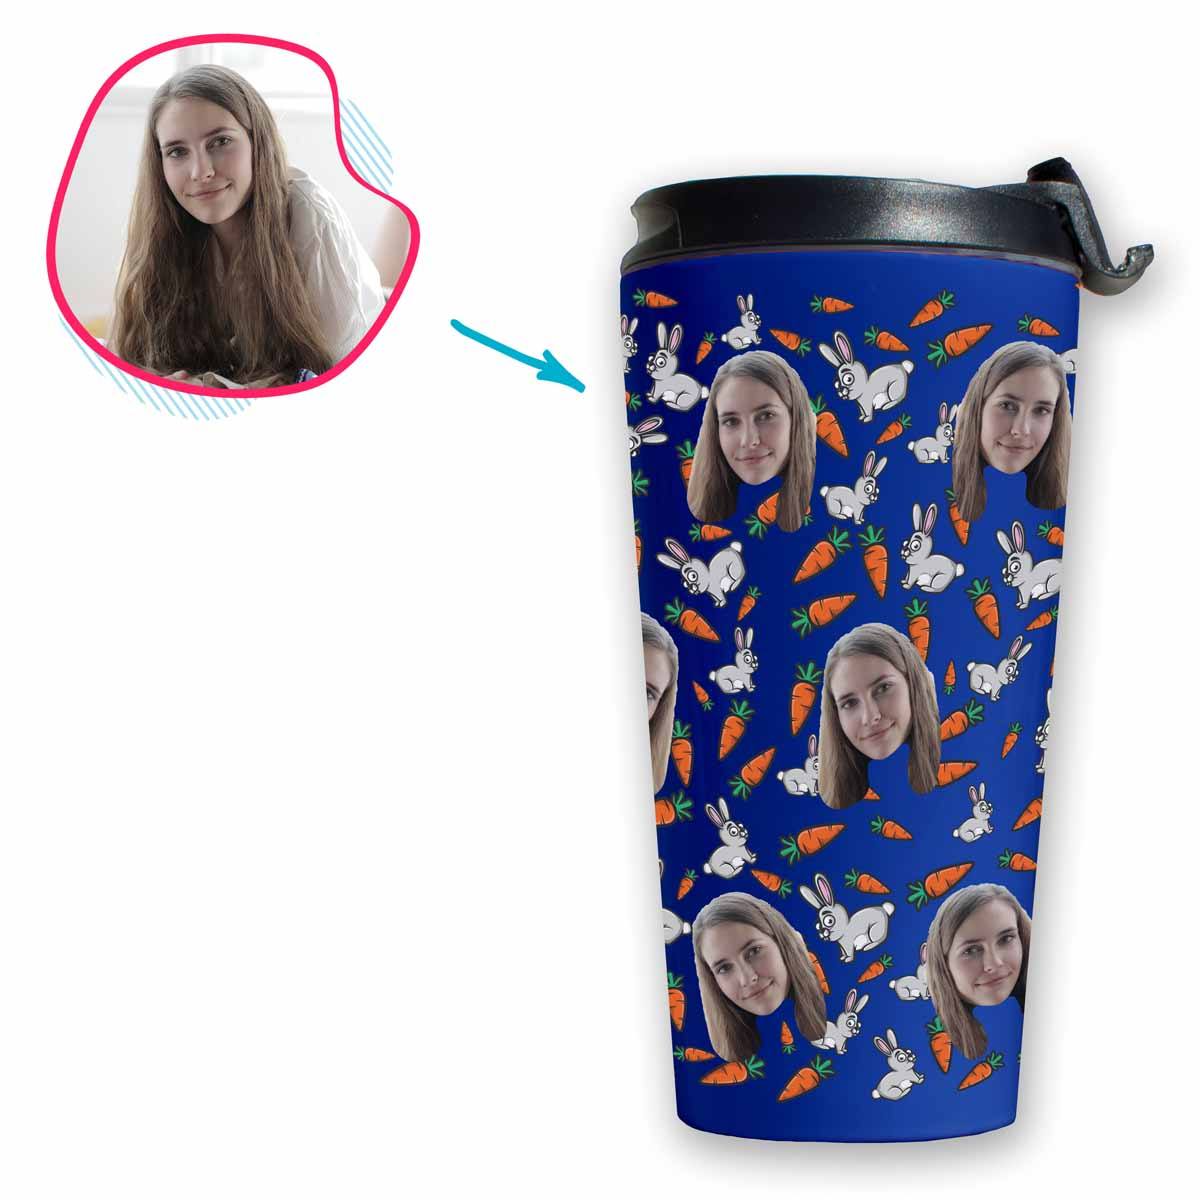 darkblue Bunny travel mug personalized with photo of face printed on it